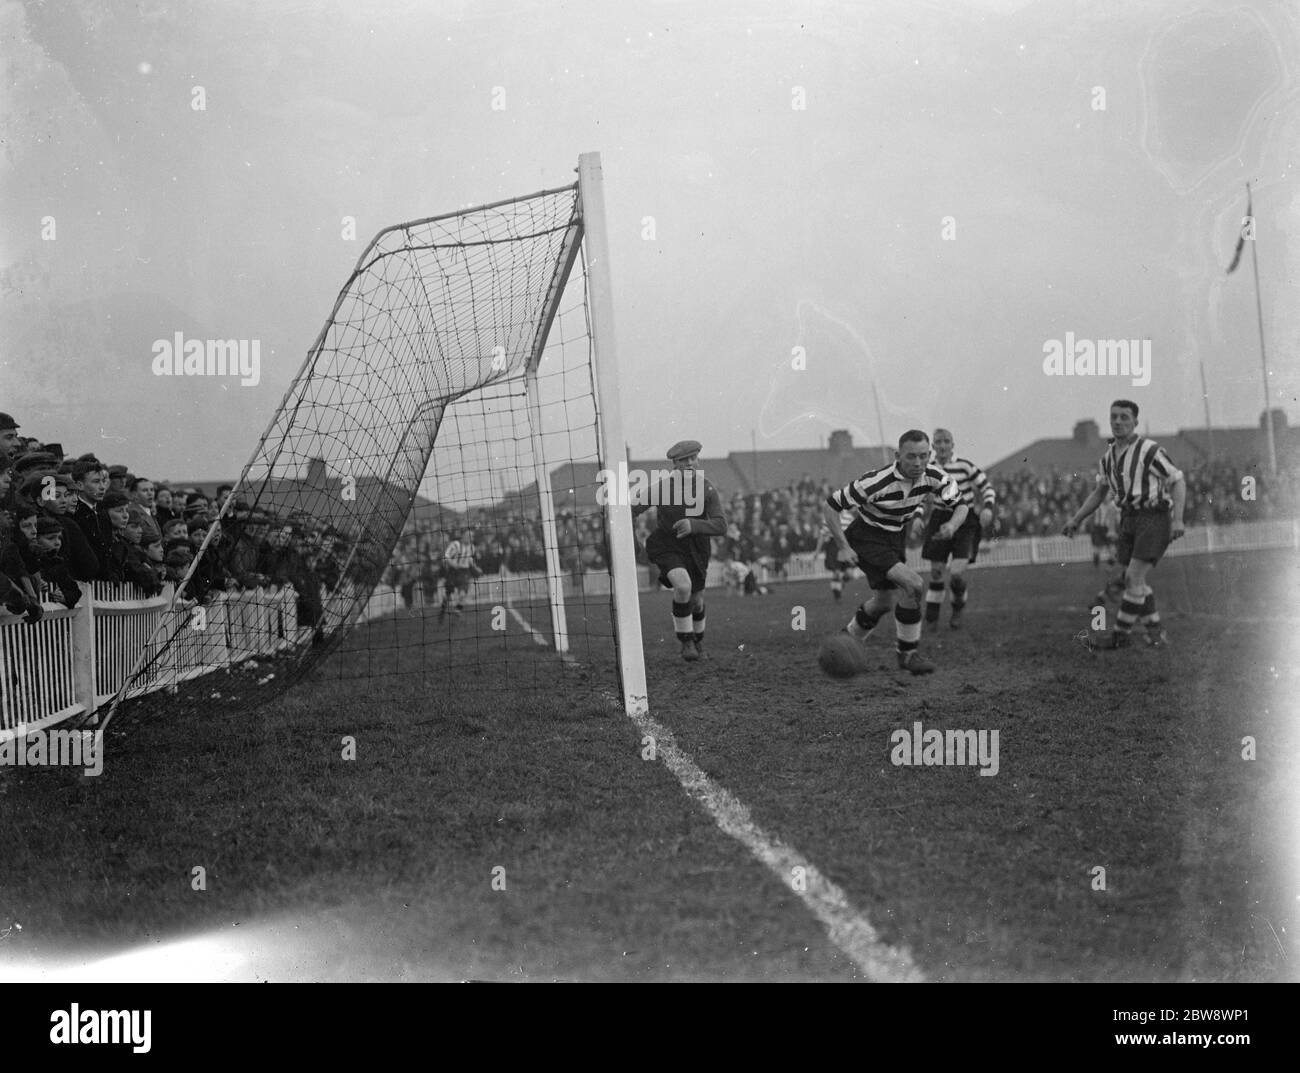 Dartford versus Darlington football match . Action in front of the goal . 1937 Stock Photo